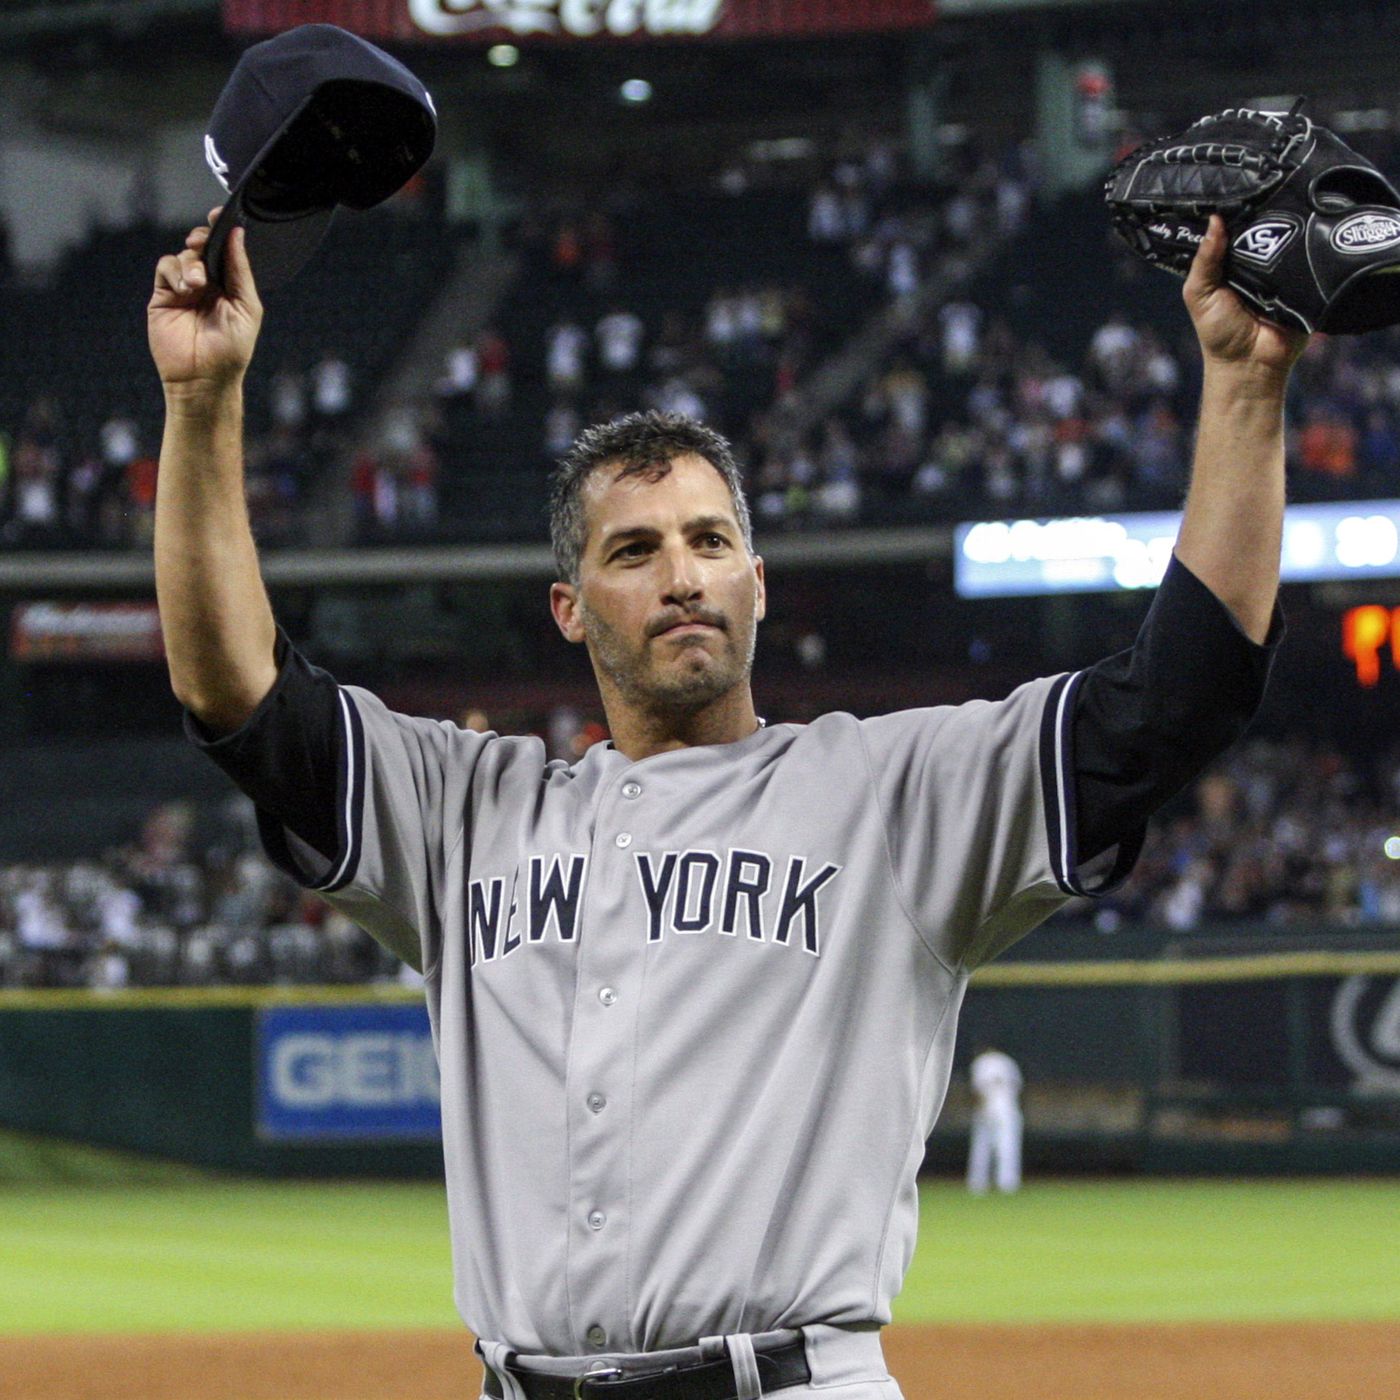 Farewell to Andy Pettitte